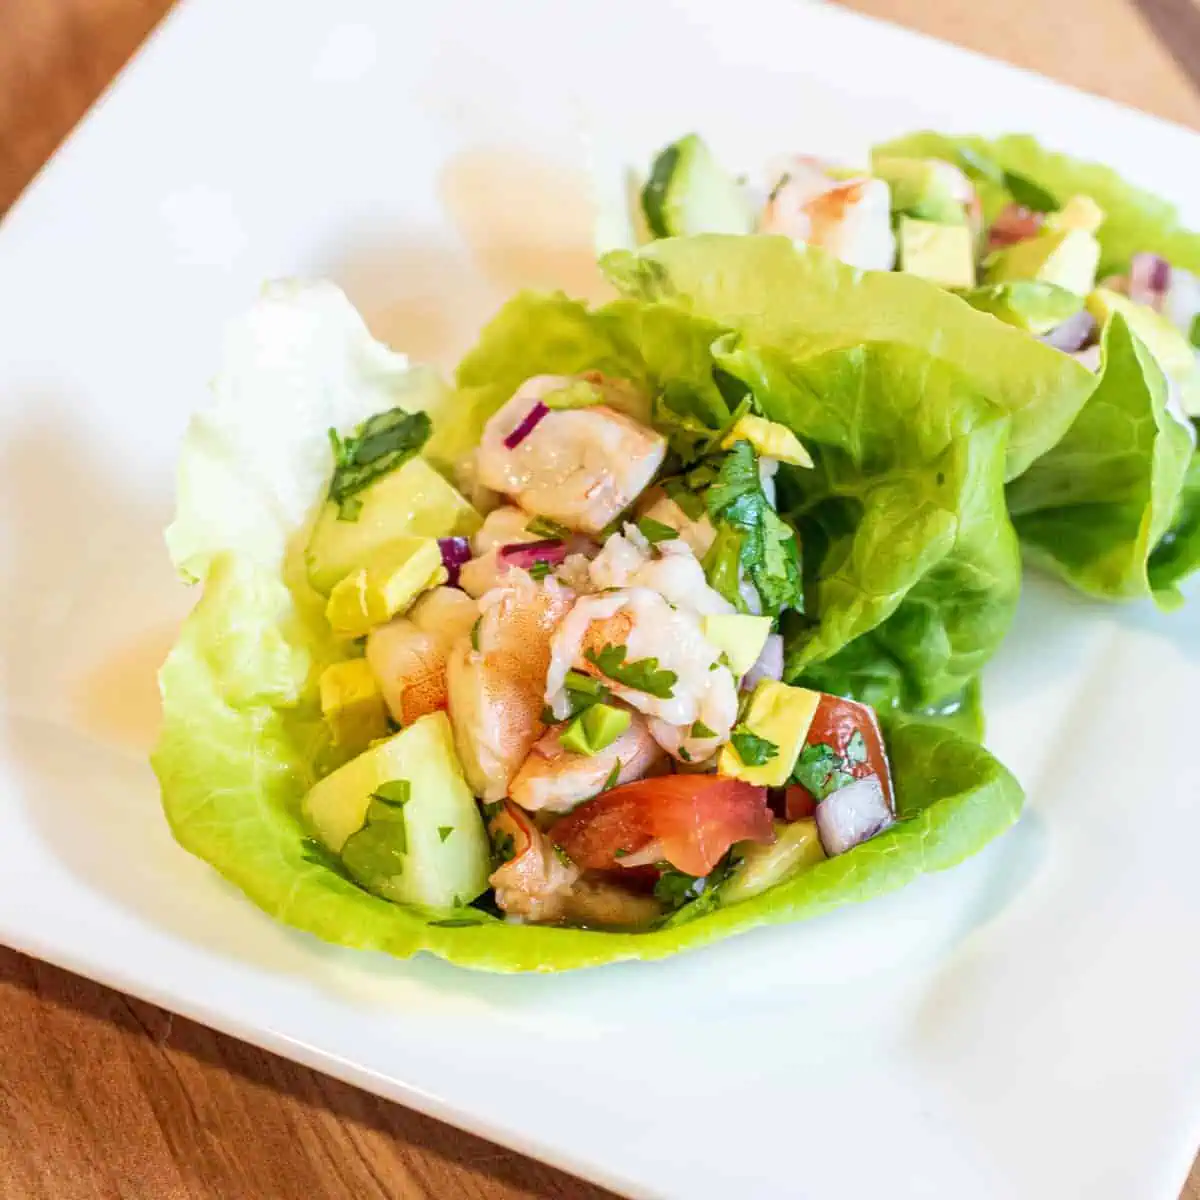 Lettuce wraps with shrimp ceviche, diced red onion, cucumber, avocado, tomato, and cilantro on a white square plate.